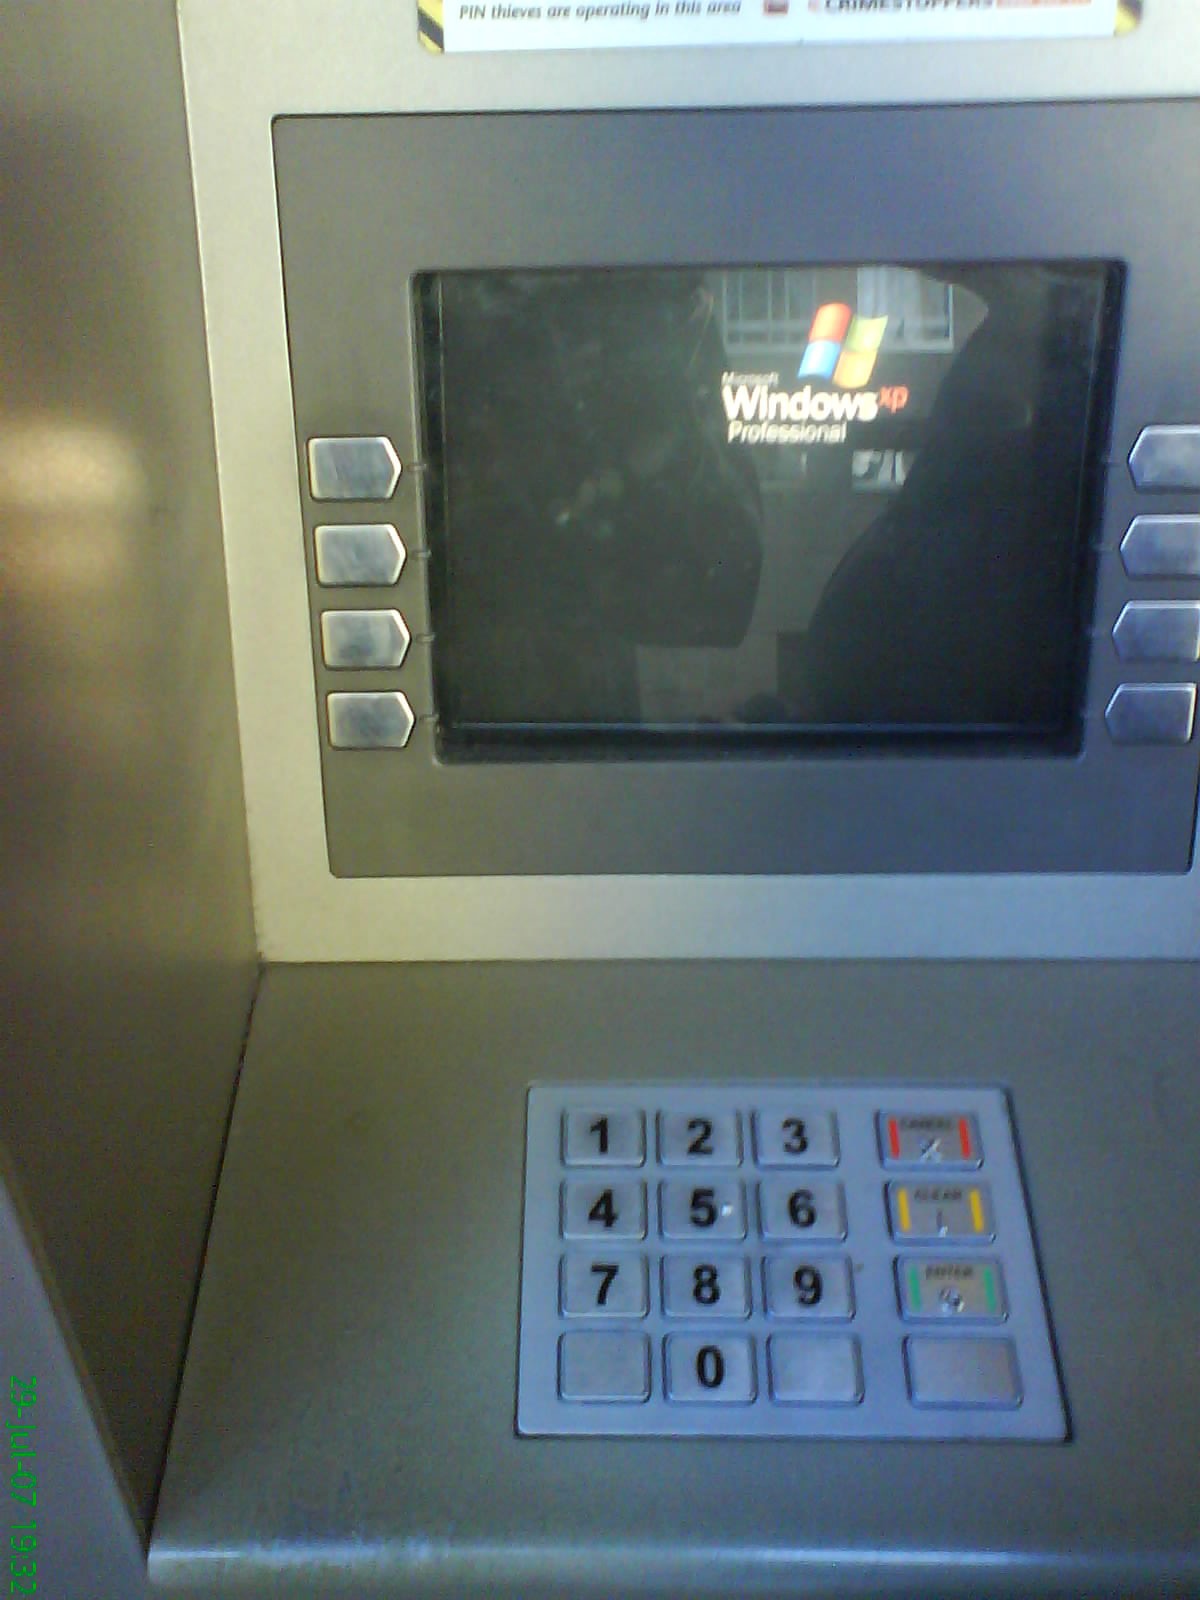 Do Atms Running Windows Xp Pose A Security Risk You Can - patched atm roblox cracked